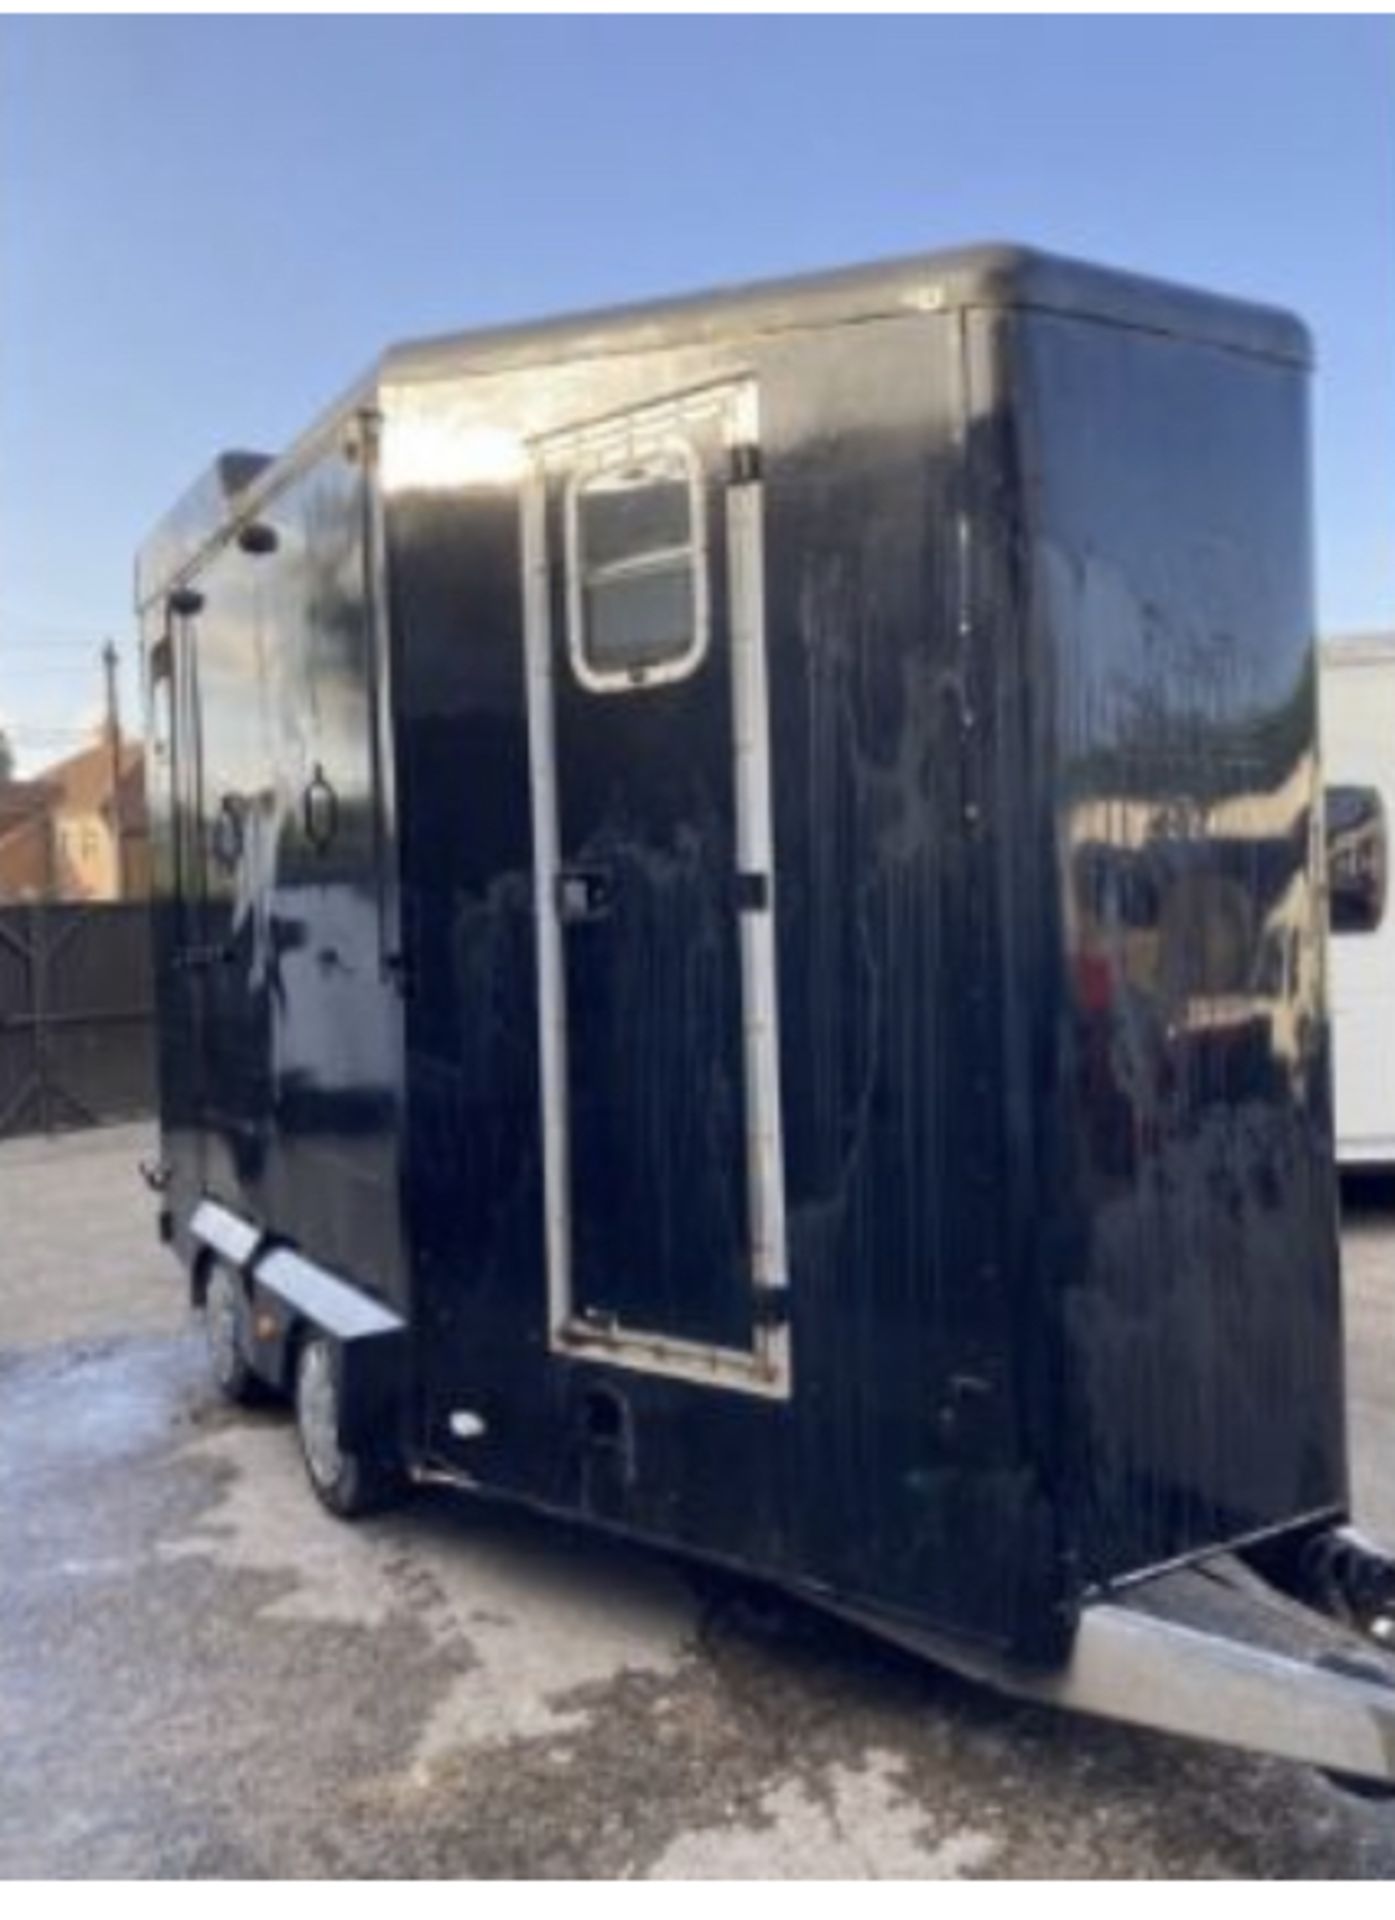 EQUITREK 2 HORSEBOX WITH DAY LIVING PARTITION. LOCATION: N.IRELAND